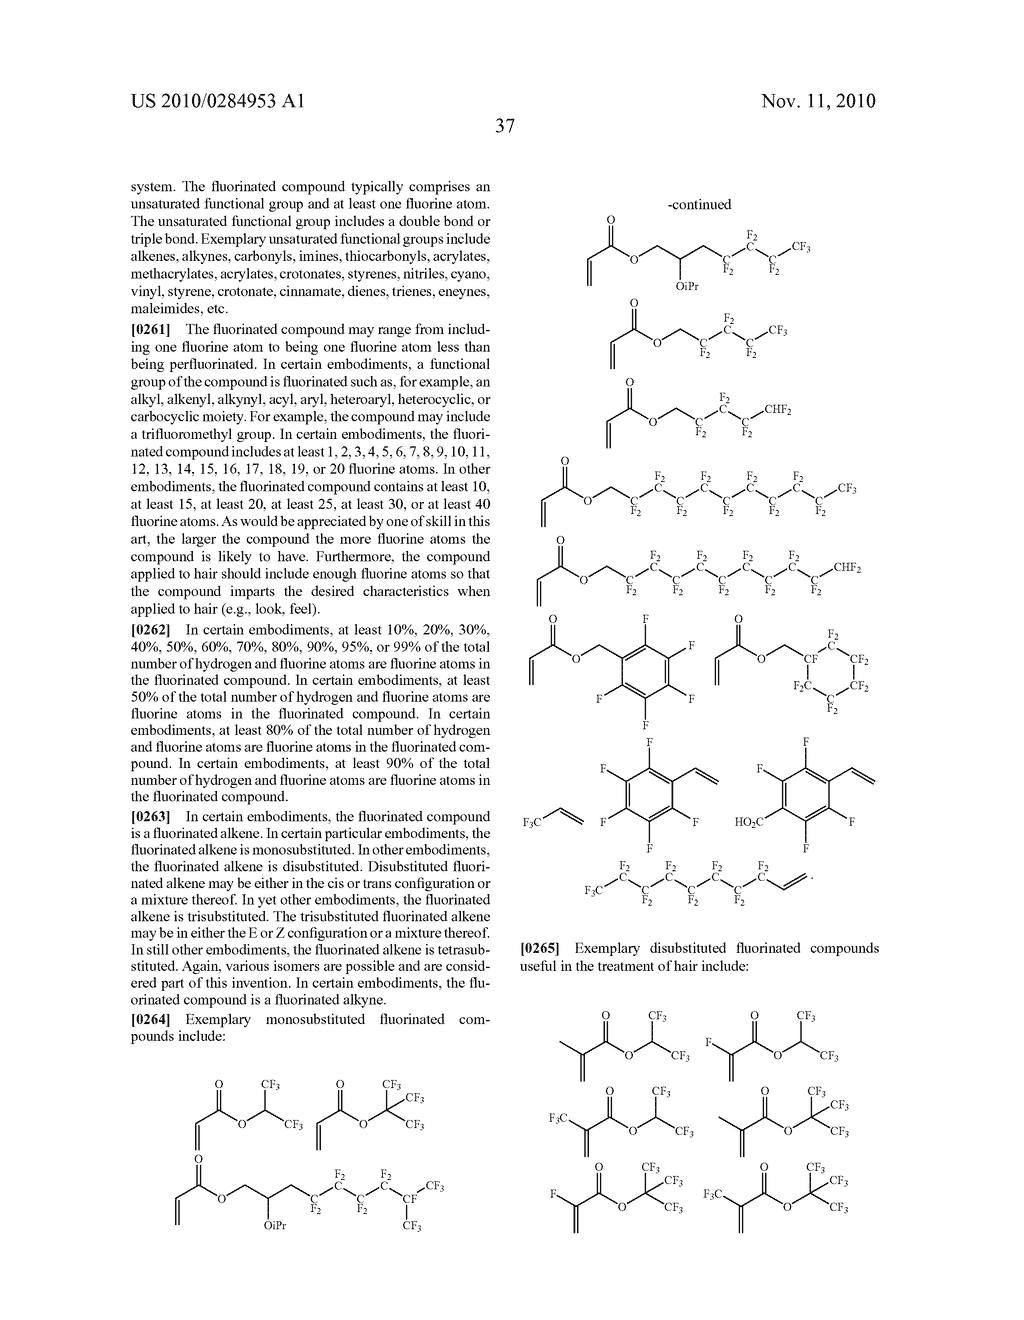 HAIR CARE COMPOSITIONS AND METHODS OF TREATING HAIR USING SAME - diagram, schematic, and image 38